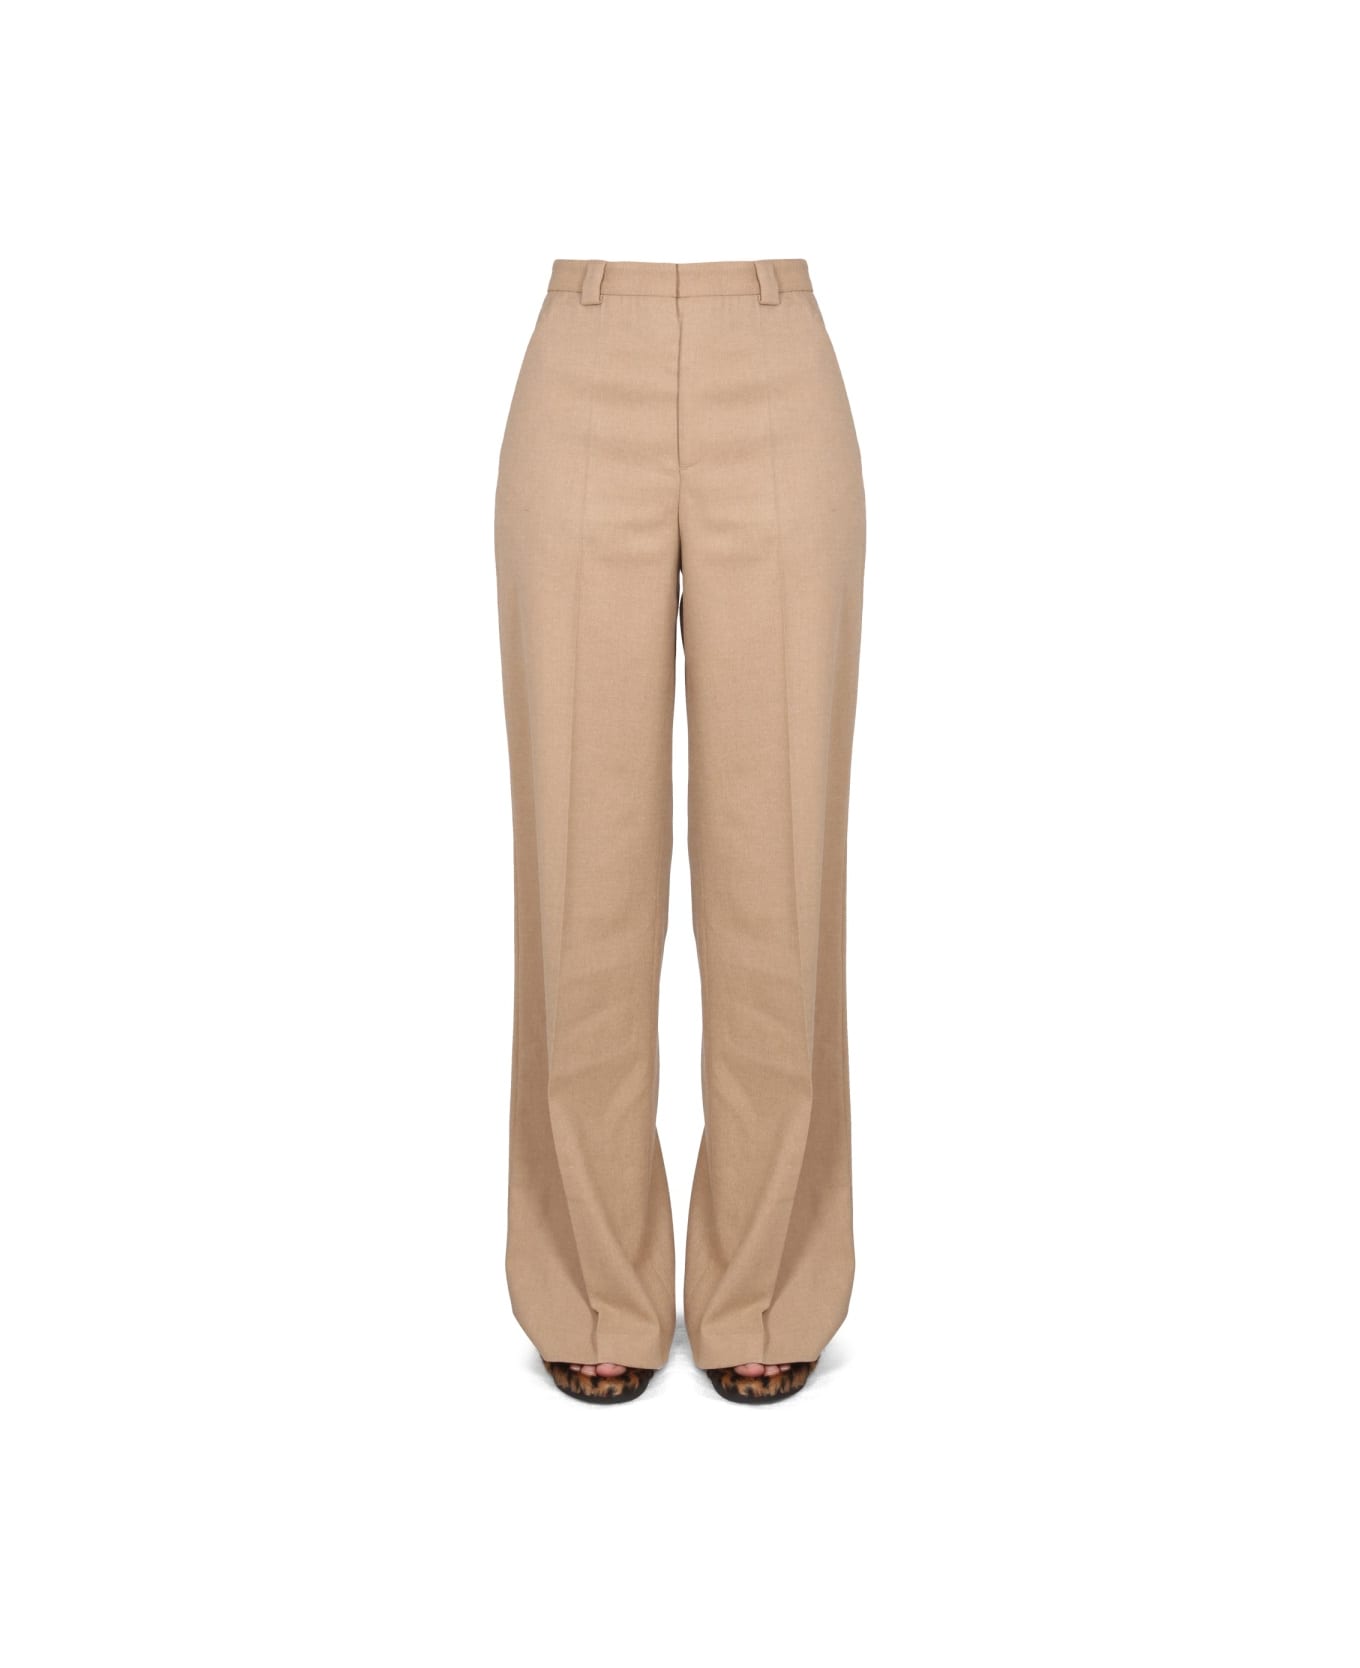 RED Valentino Flared Pants - BEIGE